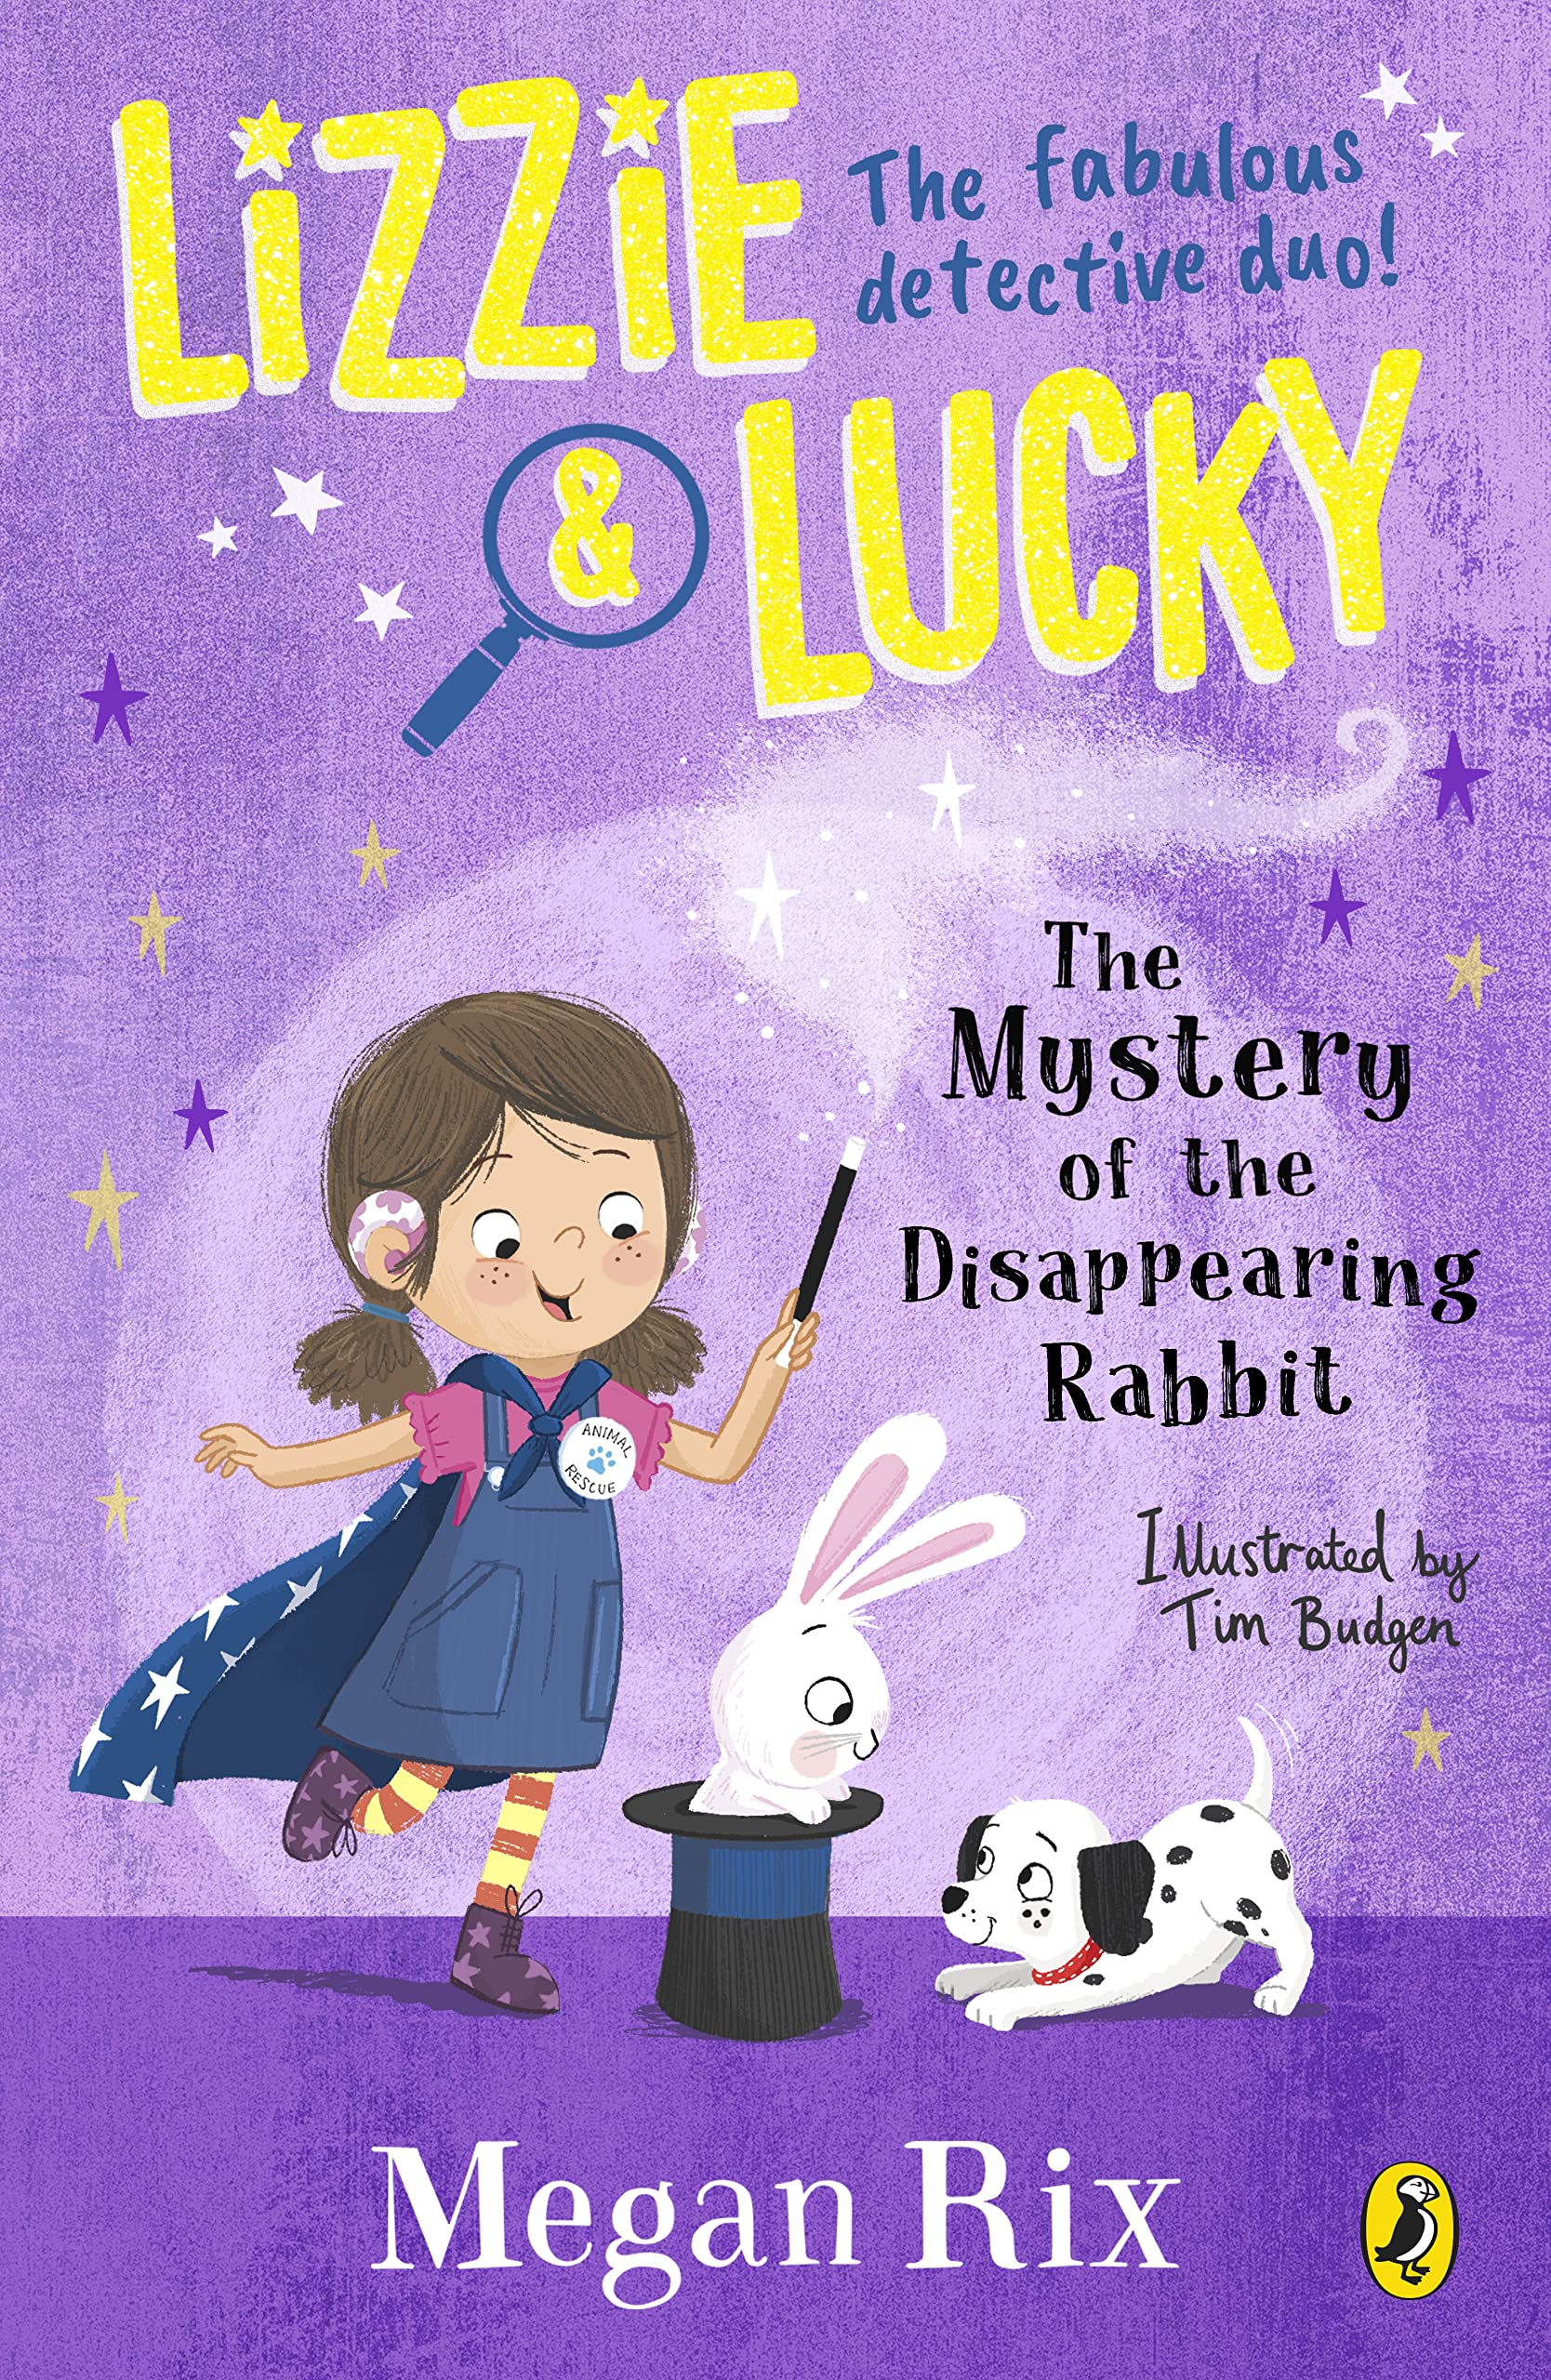 Lizzie and Lucky - The Mystery of the Disappearing Rabbit | Megan Rix